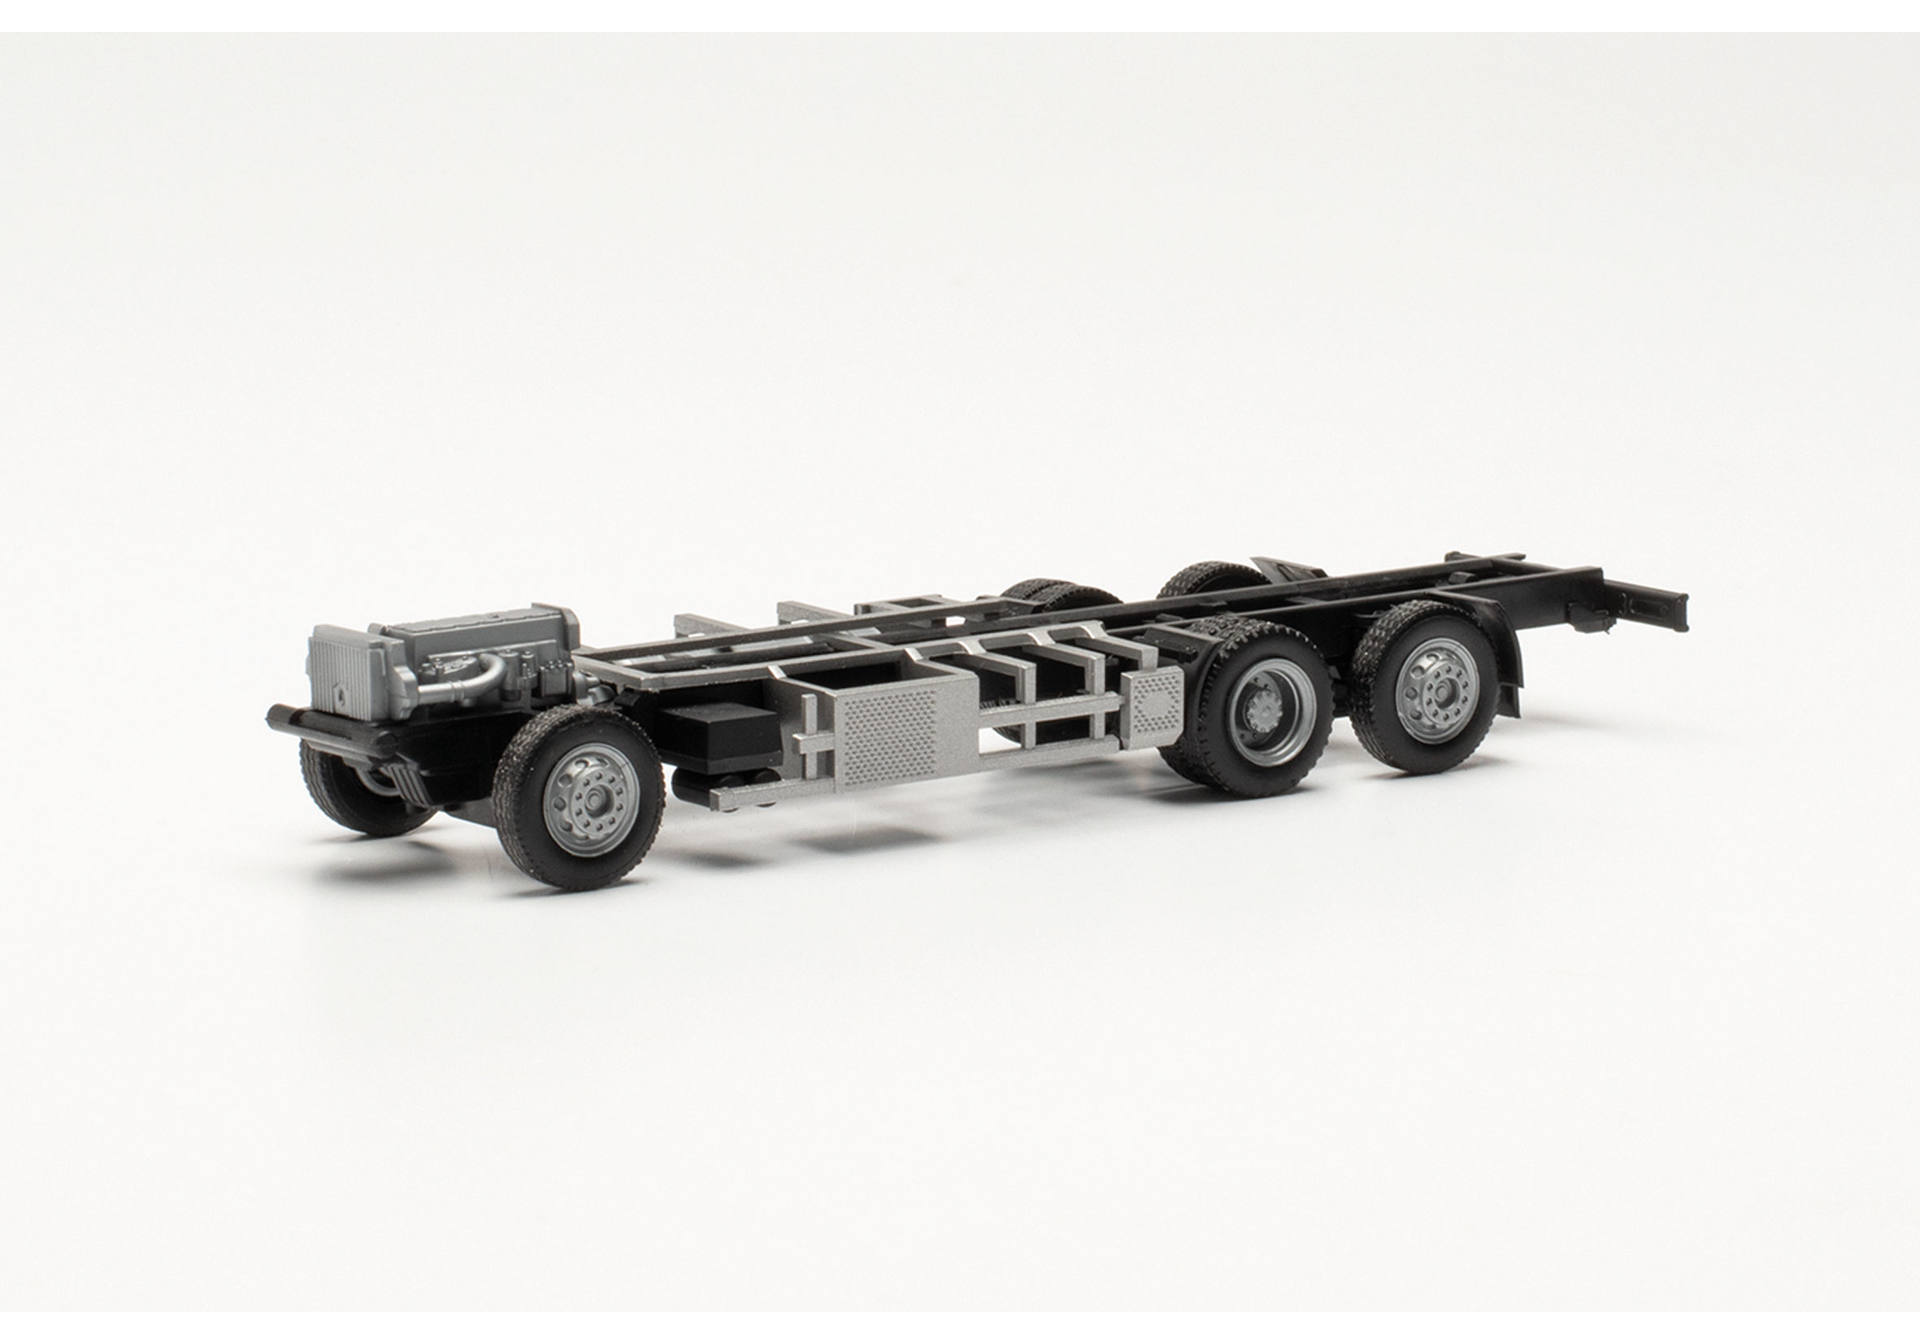 Partsservice, Iveco S-Way LNG chassis with underground cooling unit (2 pieces)